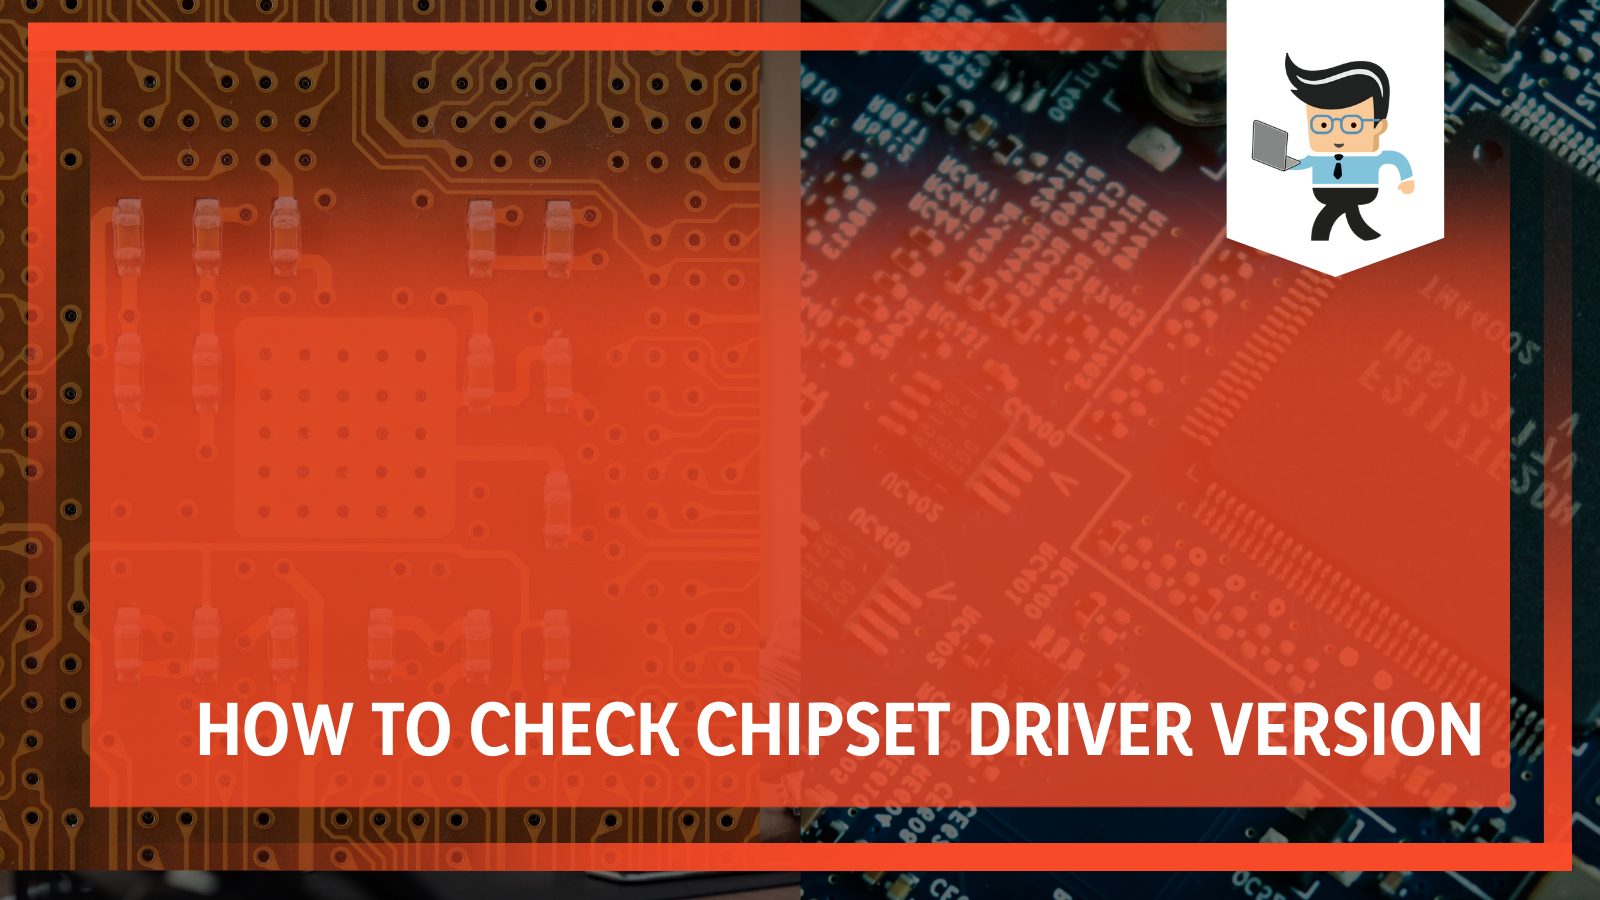 Check your chipset driver version